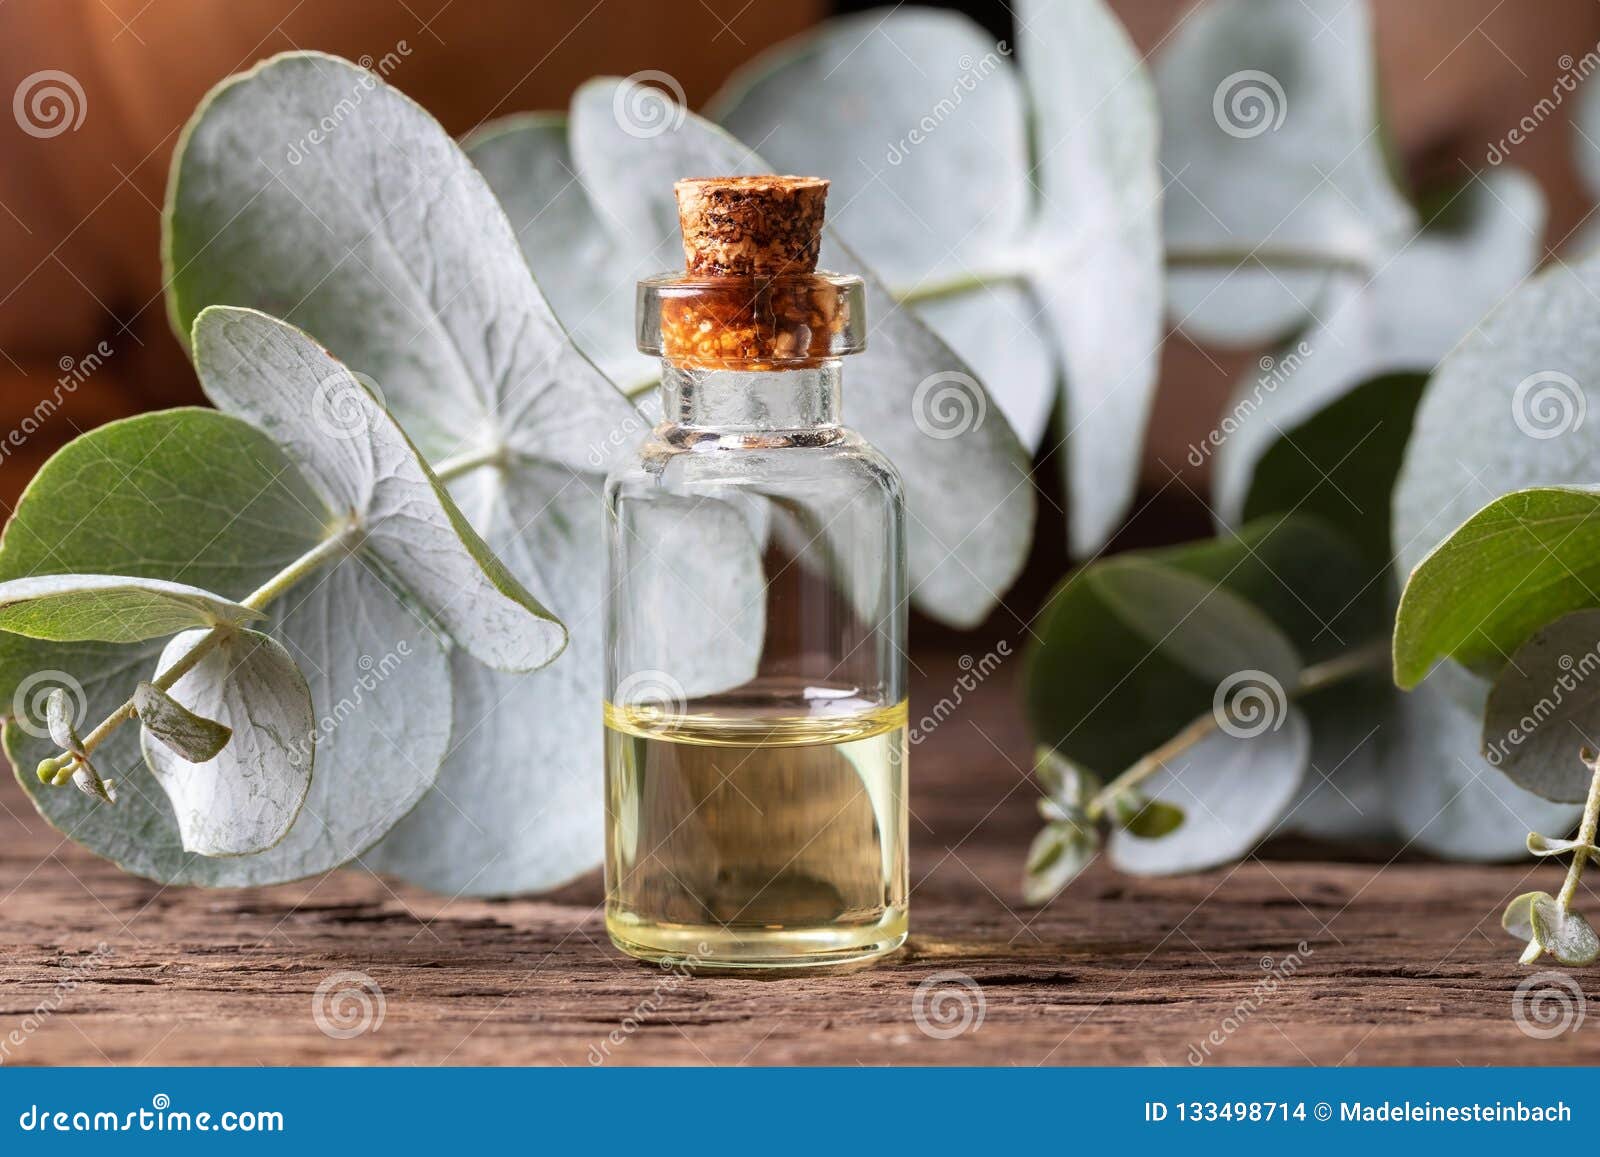 A Bottle of Essential Oil with Fresh Eucalyptus Leaves Stock Photo ...